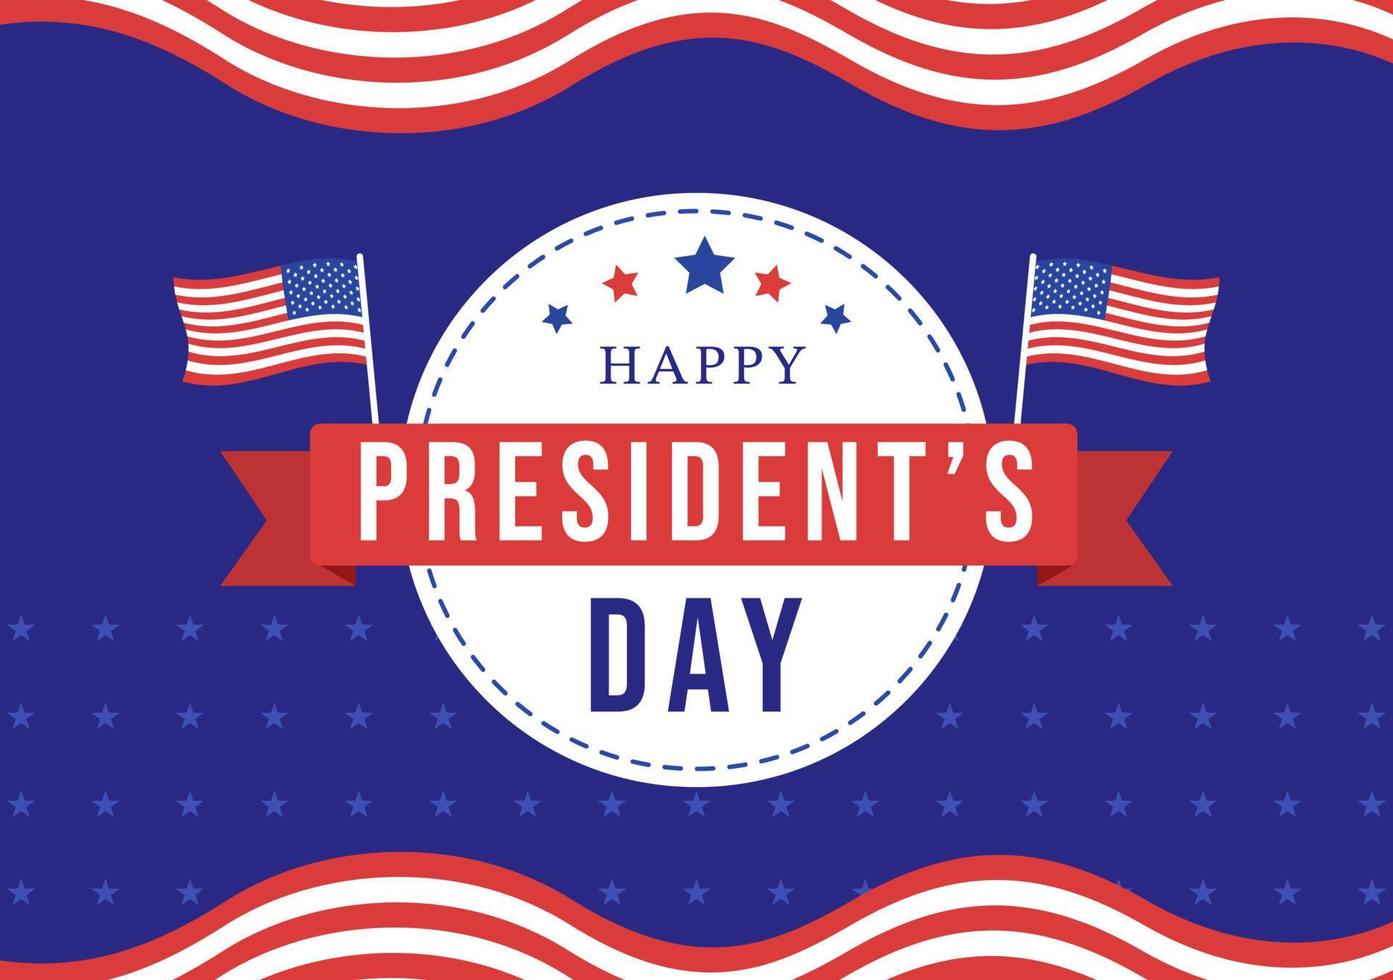 Happy Presidents Day with Stars and USA Flag for the President of America Suitable for Poster in Flat Cartoon Hand Drawn Templates Illustration vector